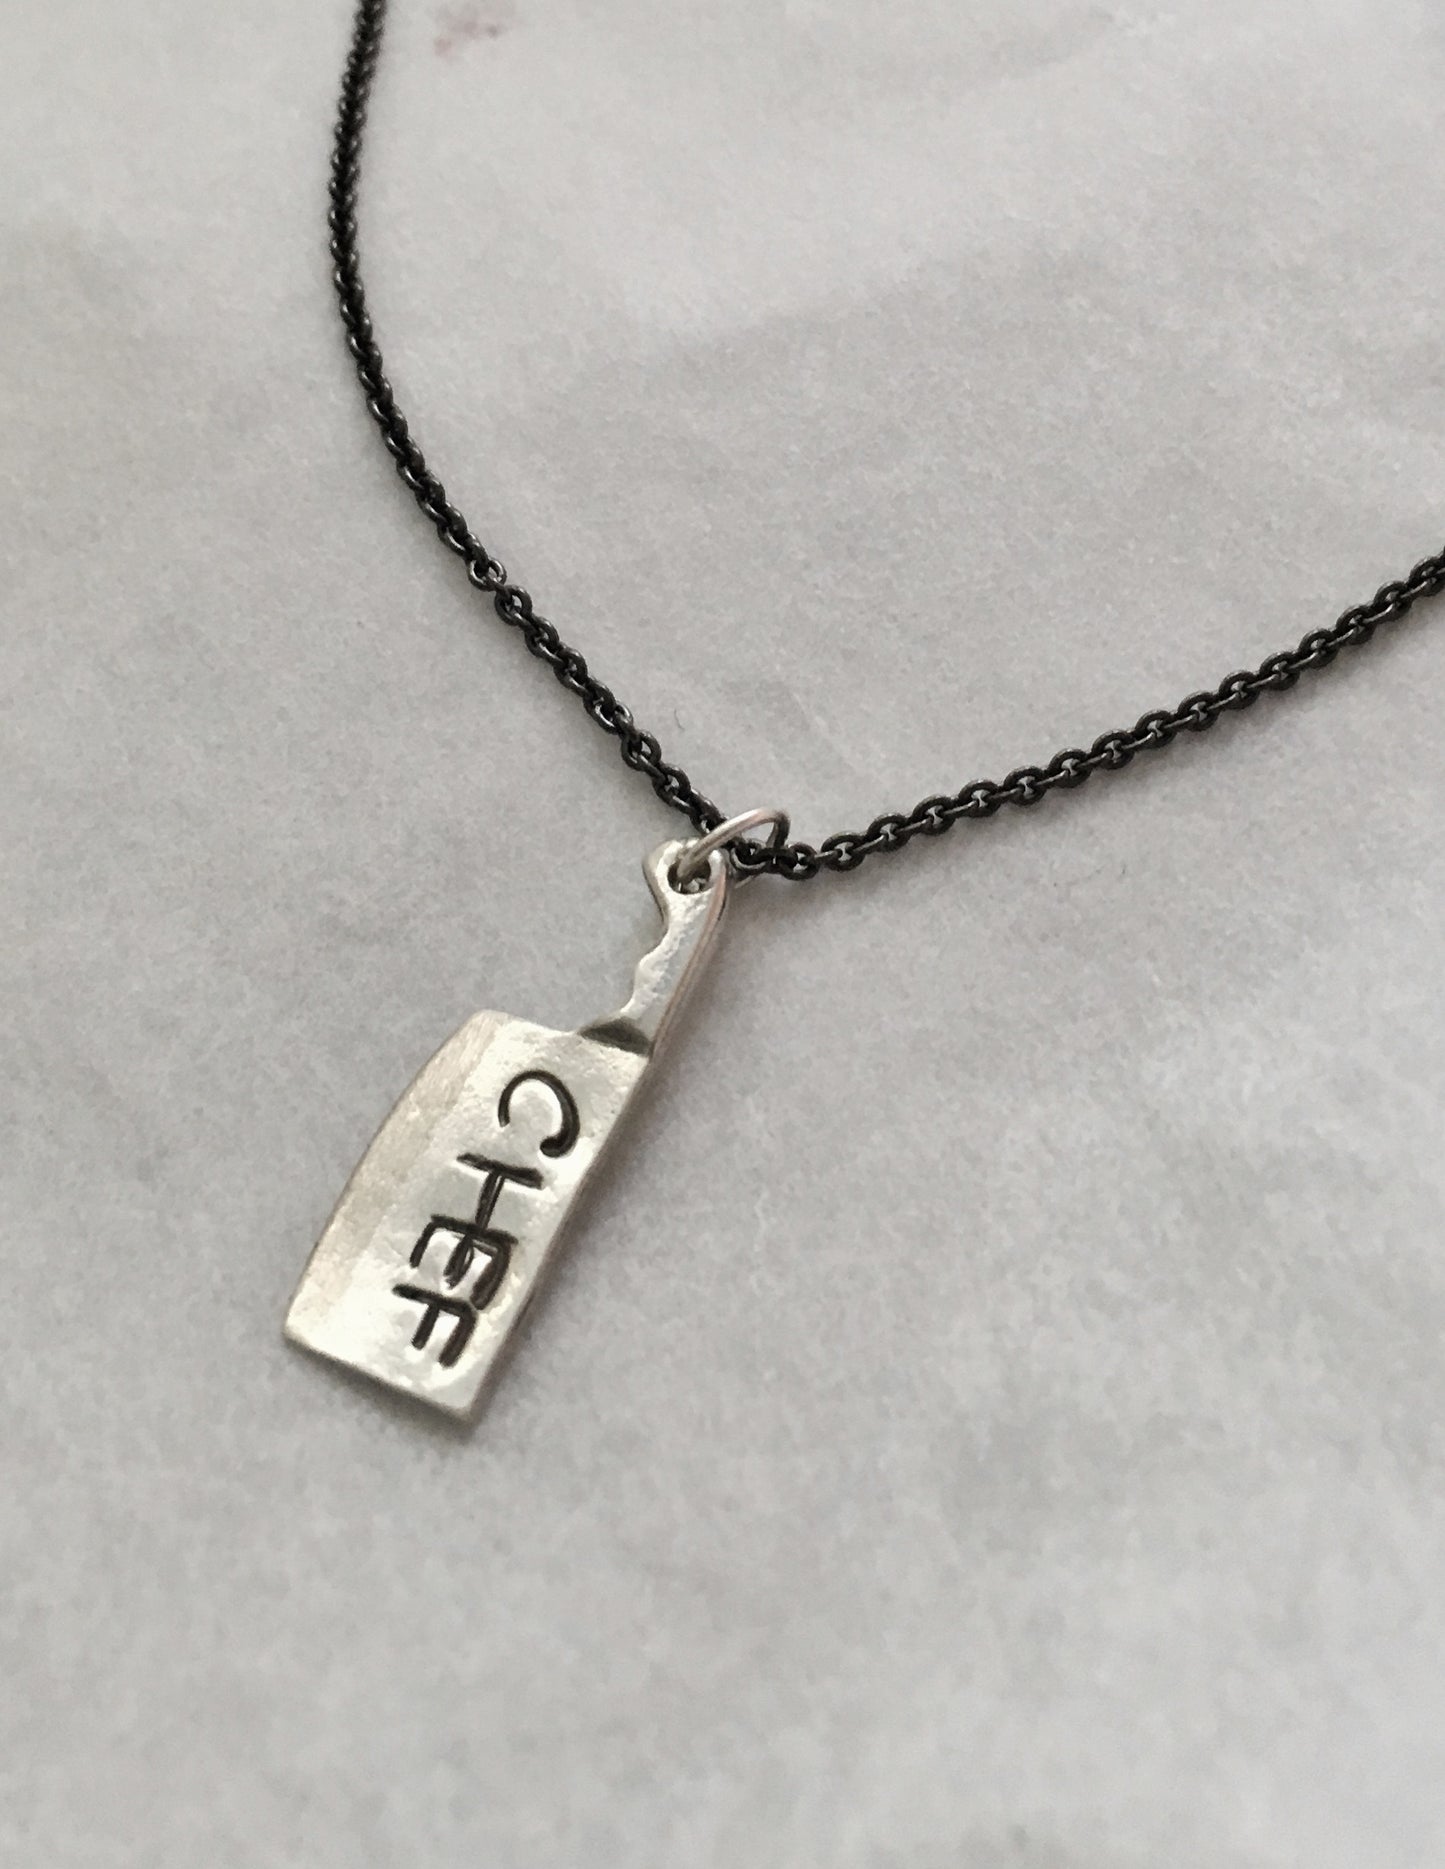 Handstamped Chef Cleaver Knife Pendant Necklace with Black Silver Chain